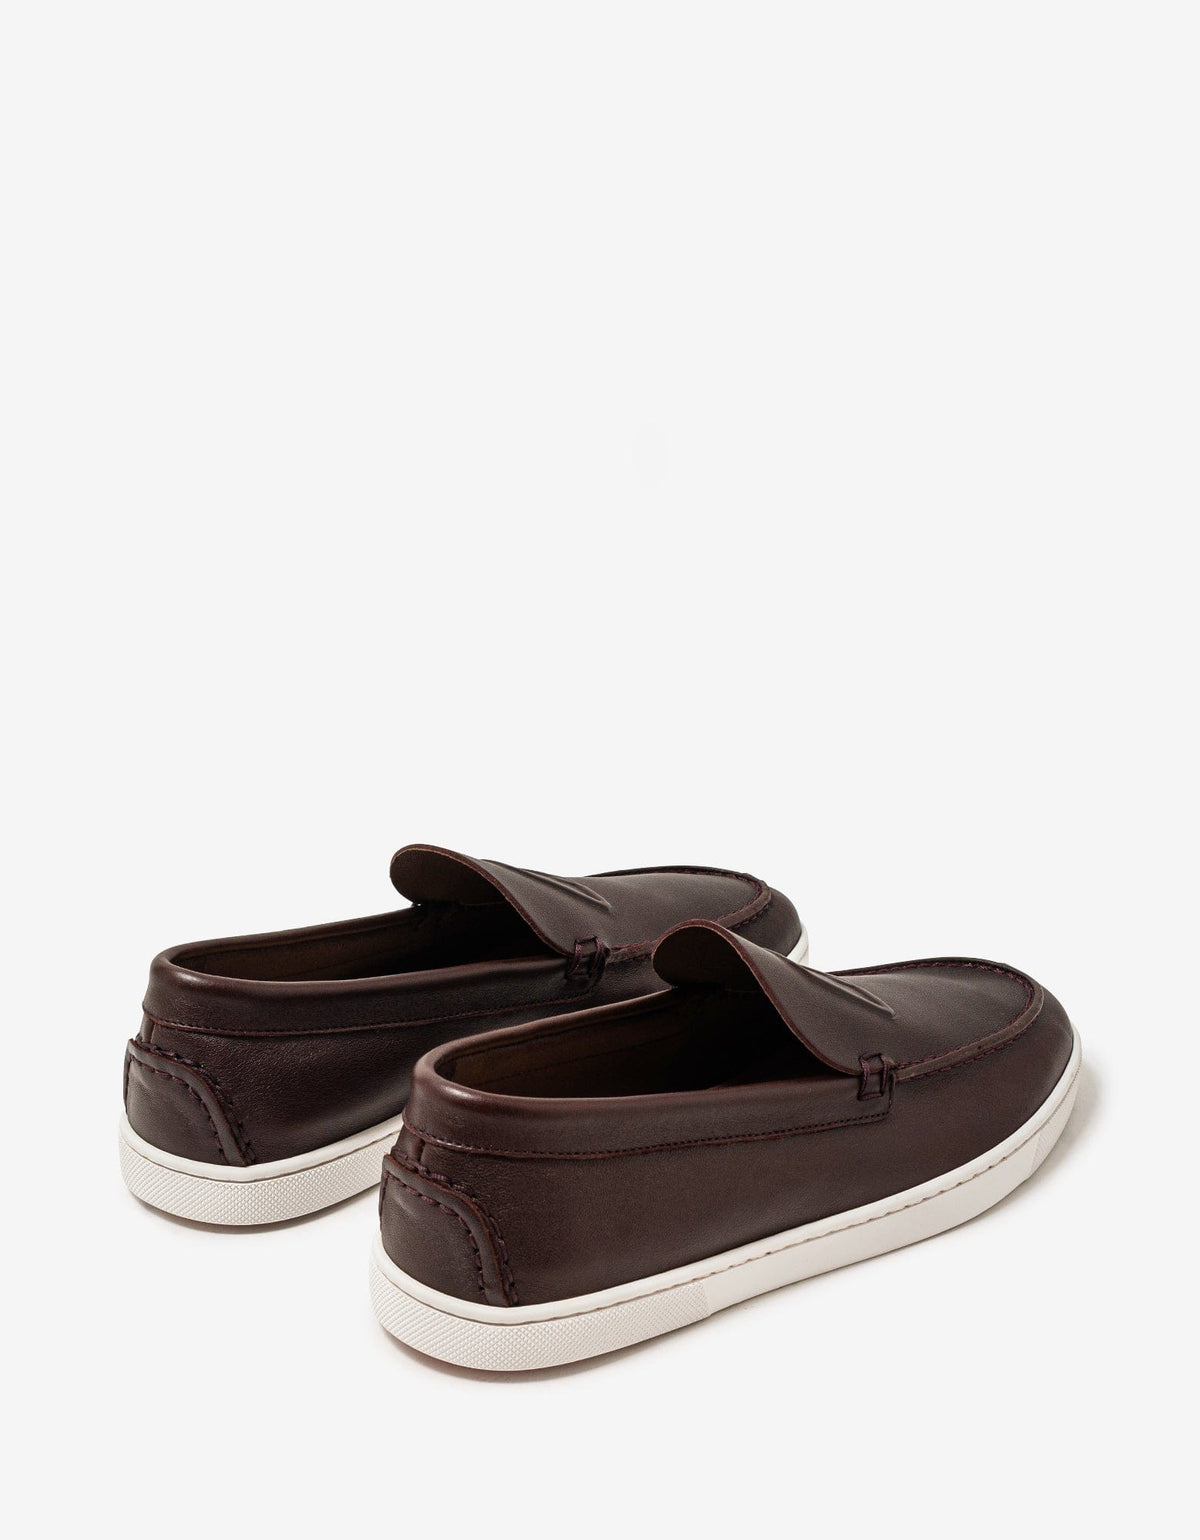 Christian Louboutin Varsiboat Brown Leather Boat Shoes